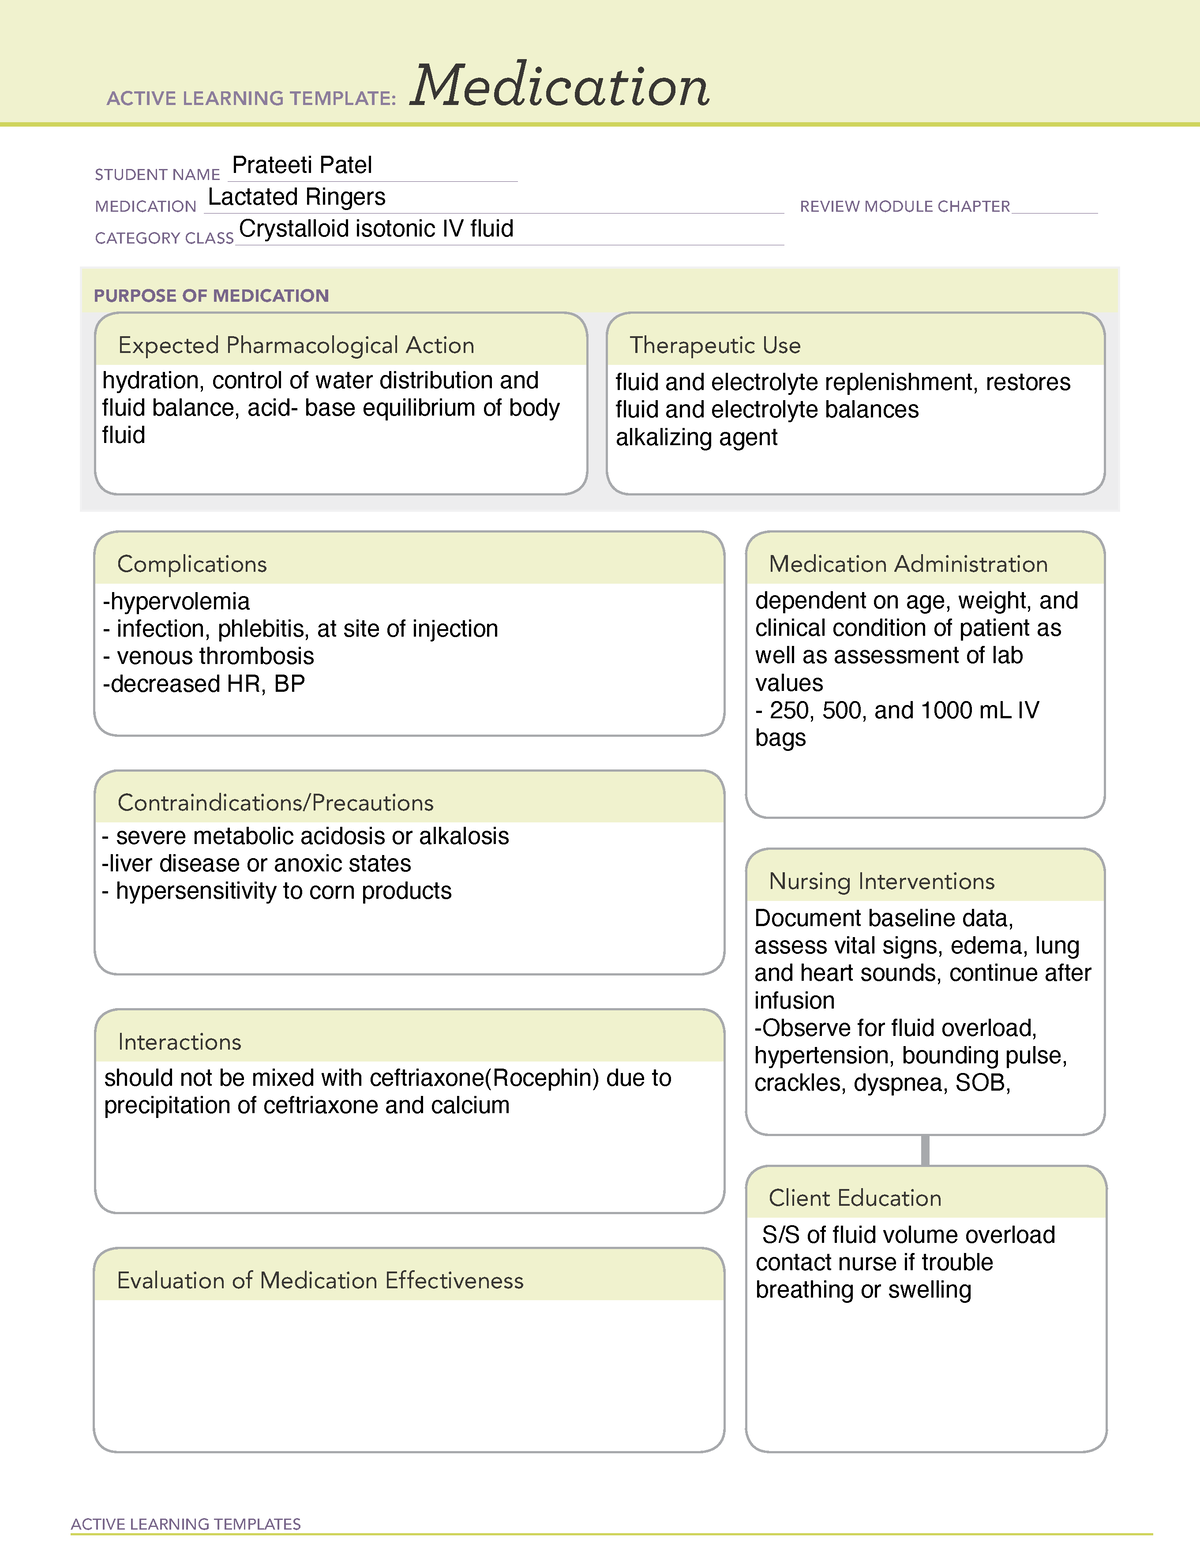 ringers-lactate-medcard-active-learning-templates-medication-student